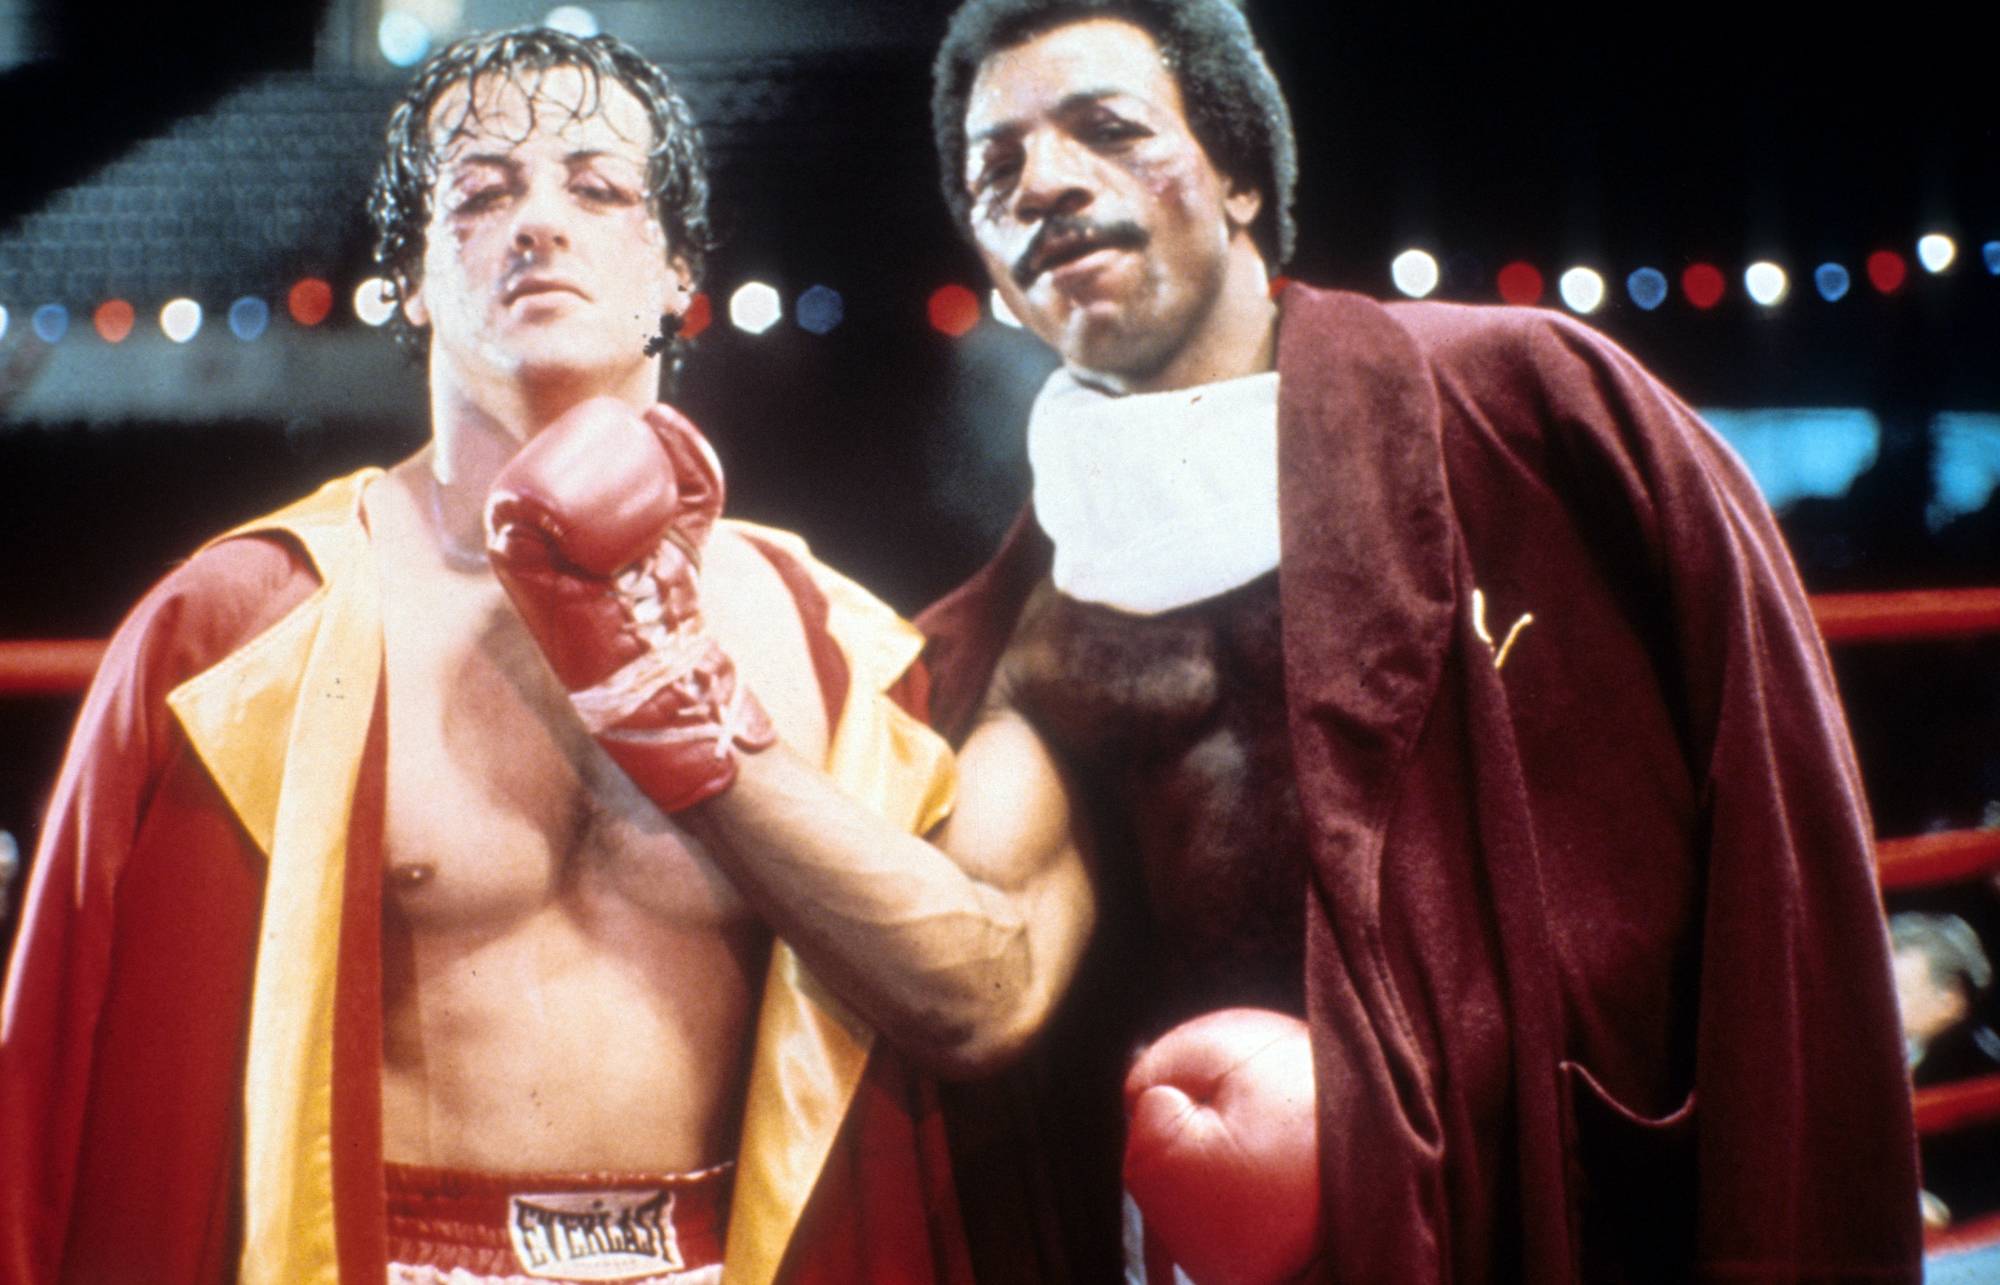 'Rocky' Sylvester Stallone as Rocky and Carl Weathers as Apollo Creed. Apollos is holding his boxing glove under Rocky's chin while they're wearing robes.